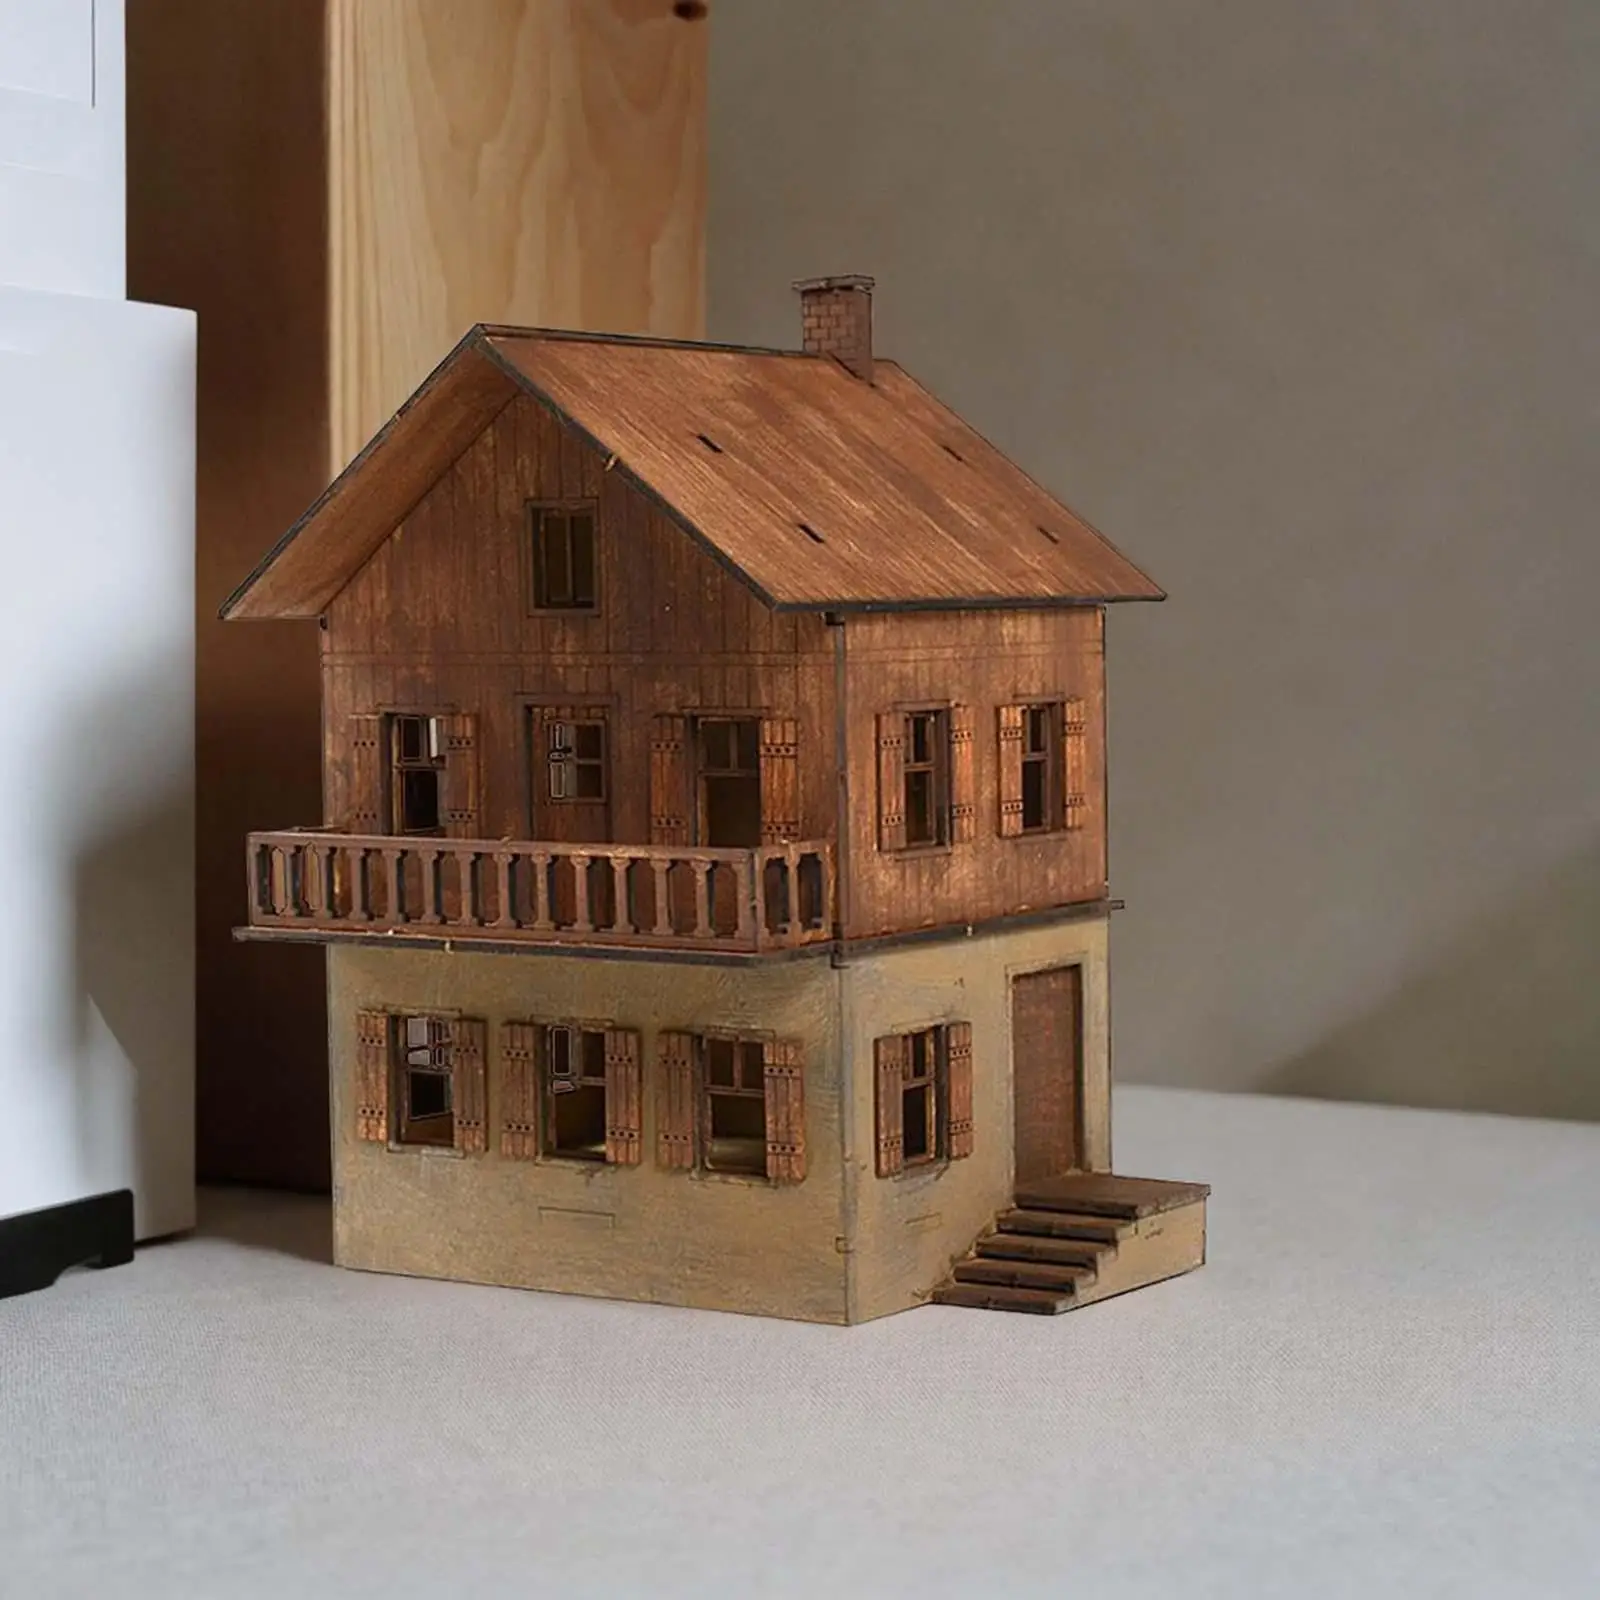 Wooden Model Kits House Handmade Wooden Puzzle Unpainted Buiilding Model Architecture Kits 1/72 Models House Sand Table Decor